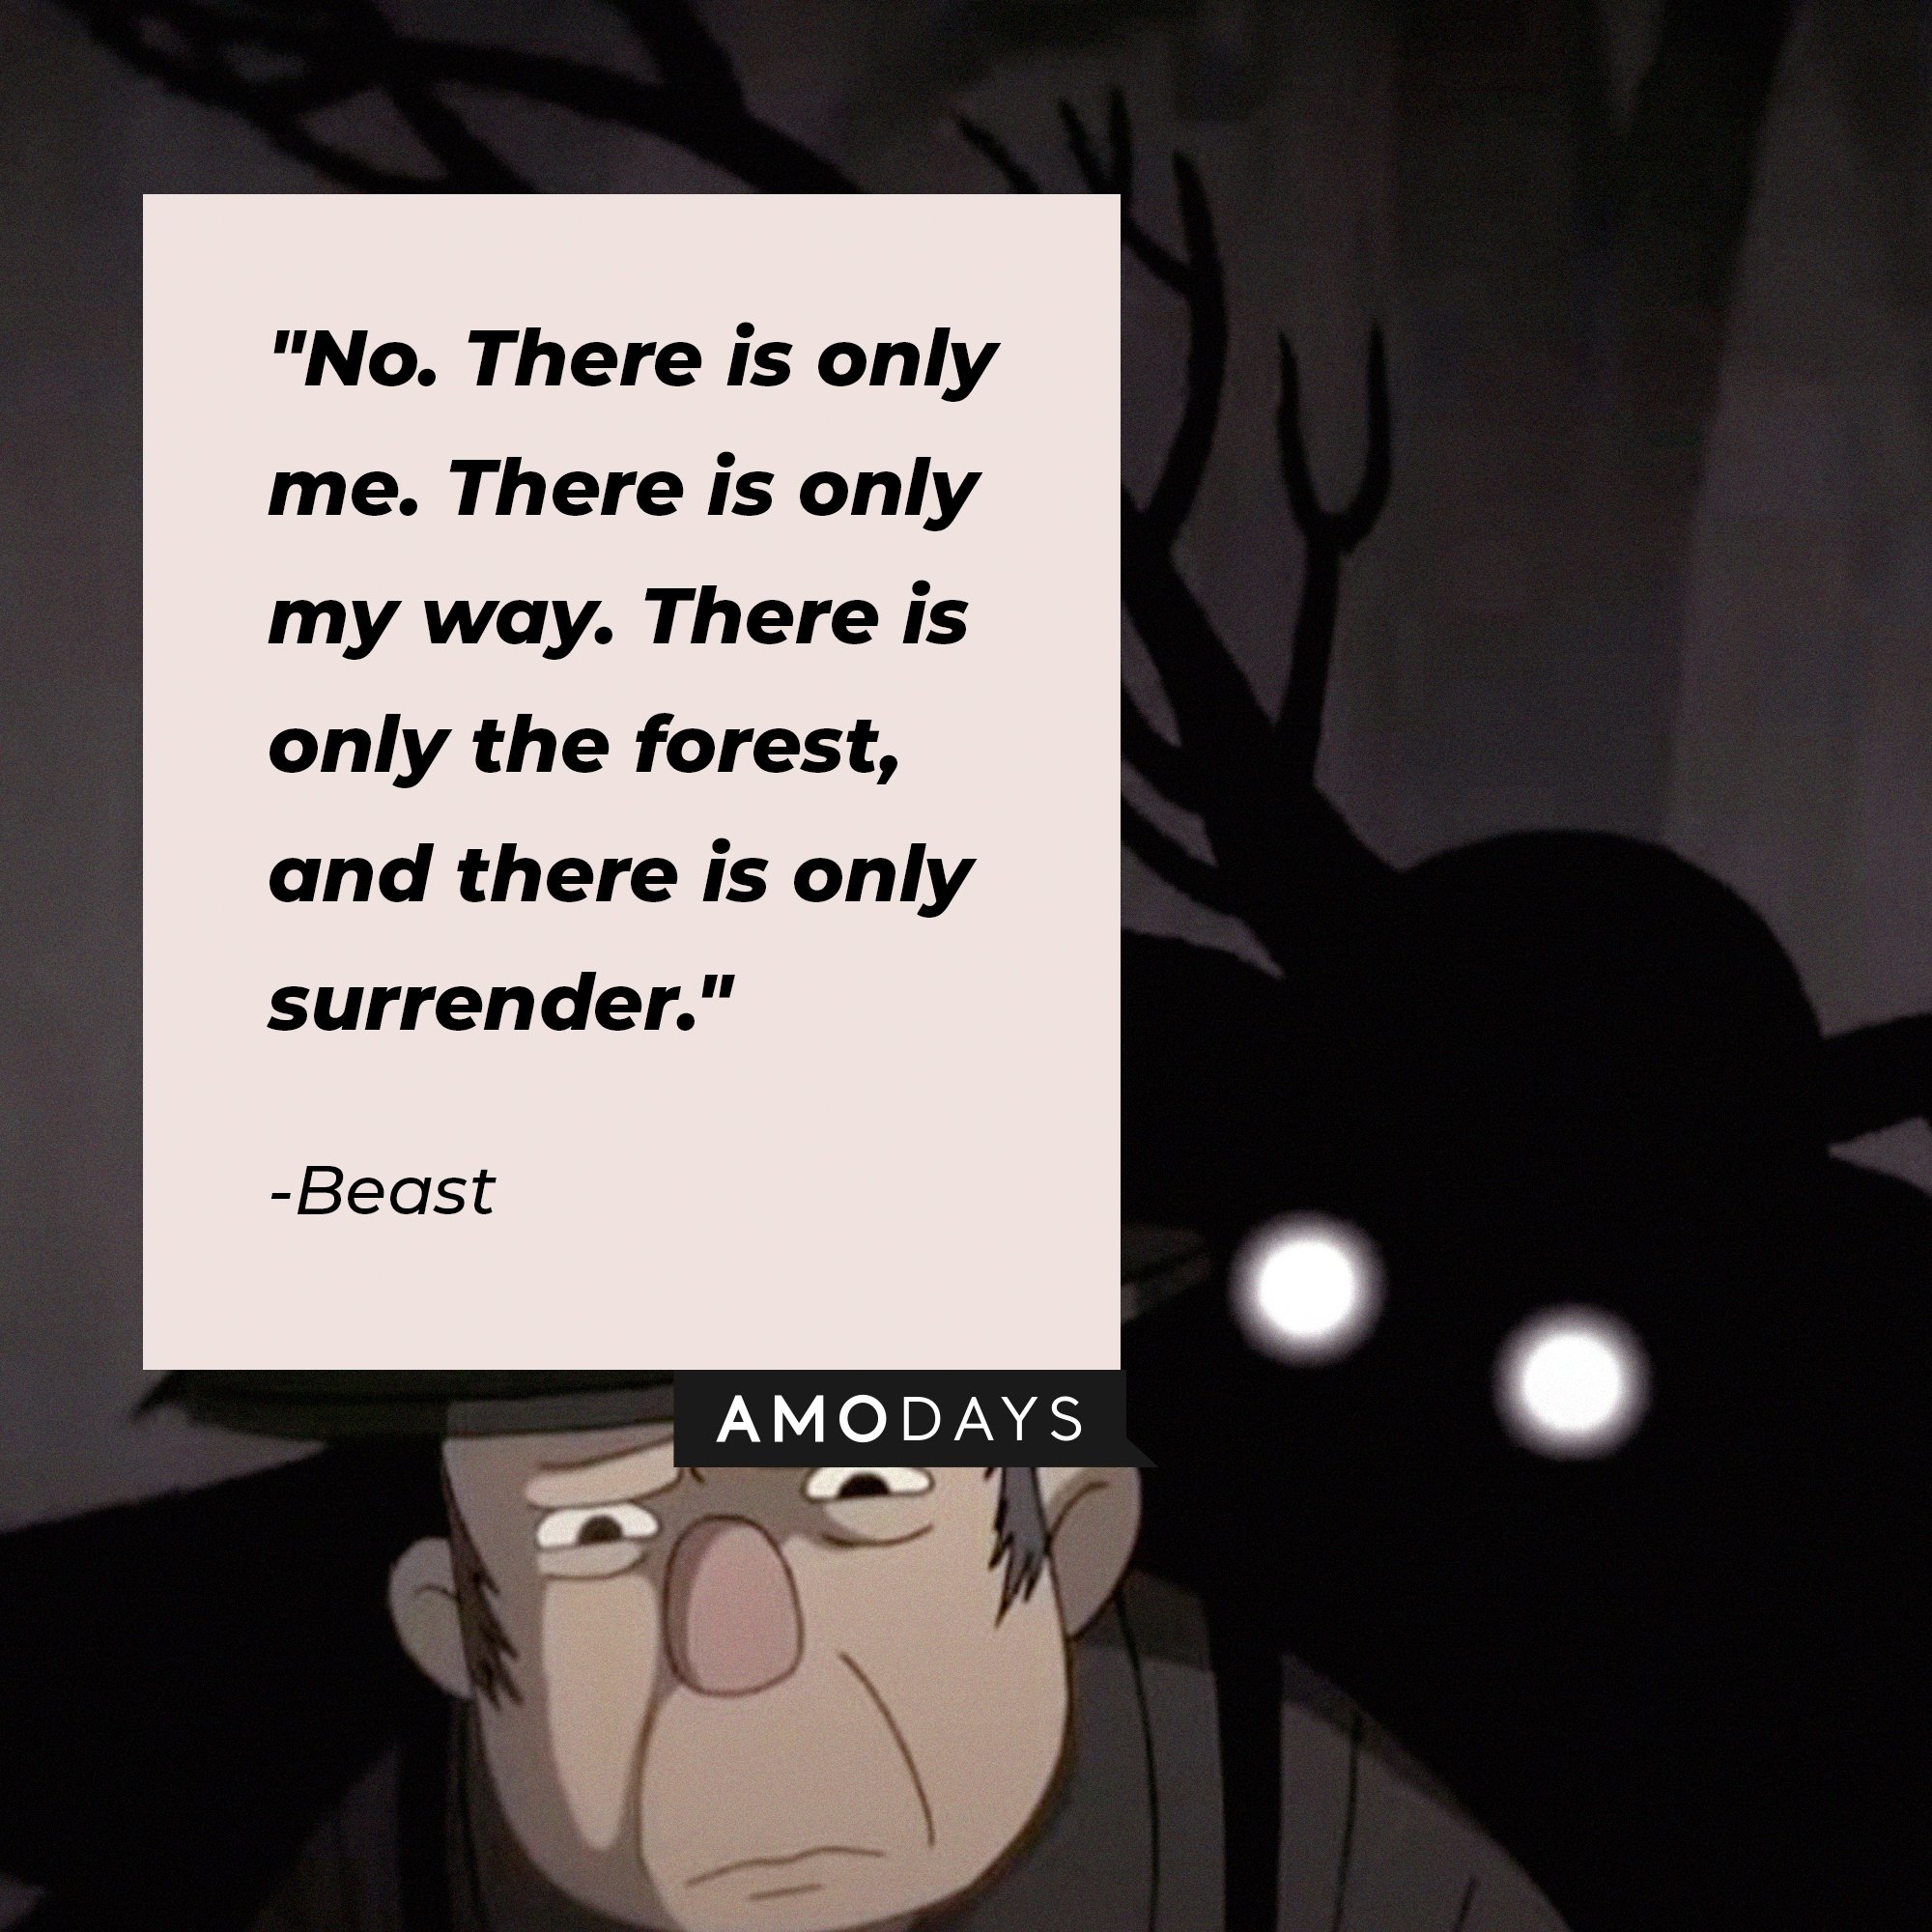  Beast’s quote: "No. There is only me. There is only my way. There is only the forest, and there is only surrender." | Image: AmoDays